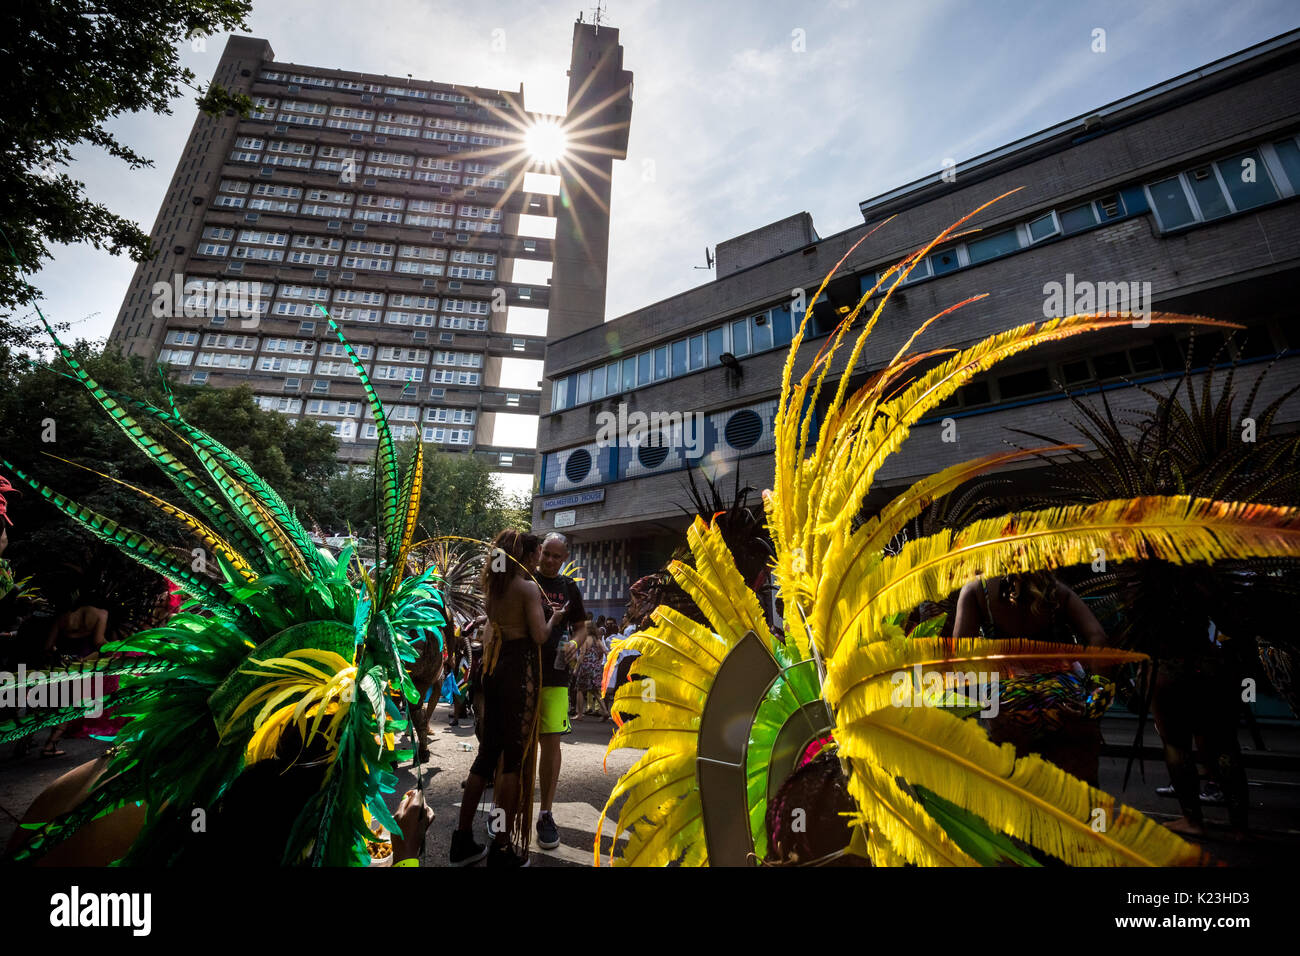 London, UK. 28th Aug, 2017. Notting Hill Carnival 2017. Europe's biggest street festival brings thousands on to the street to party Credit: Guy Corbishley/Alamy Live News Stock Photo